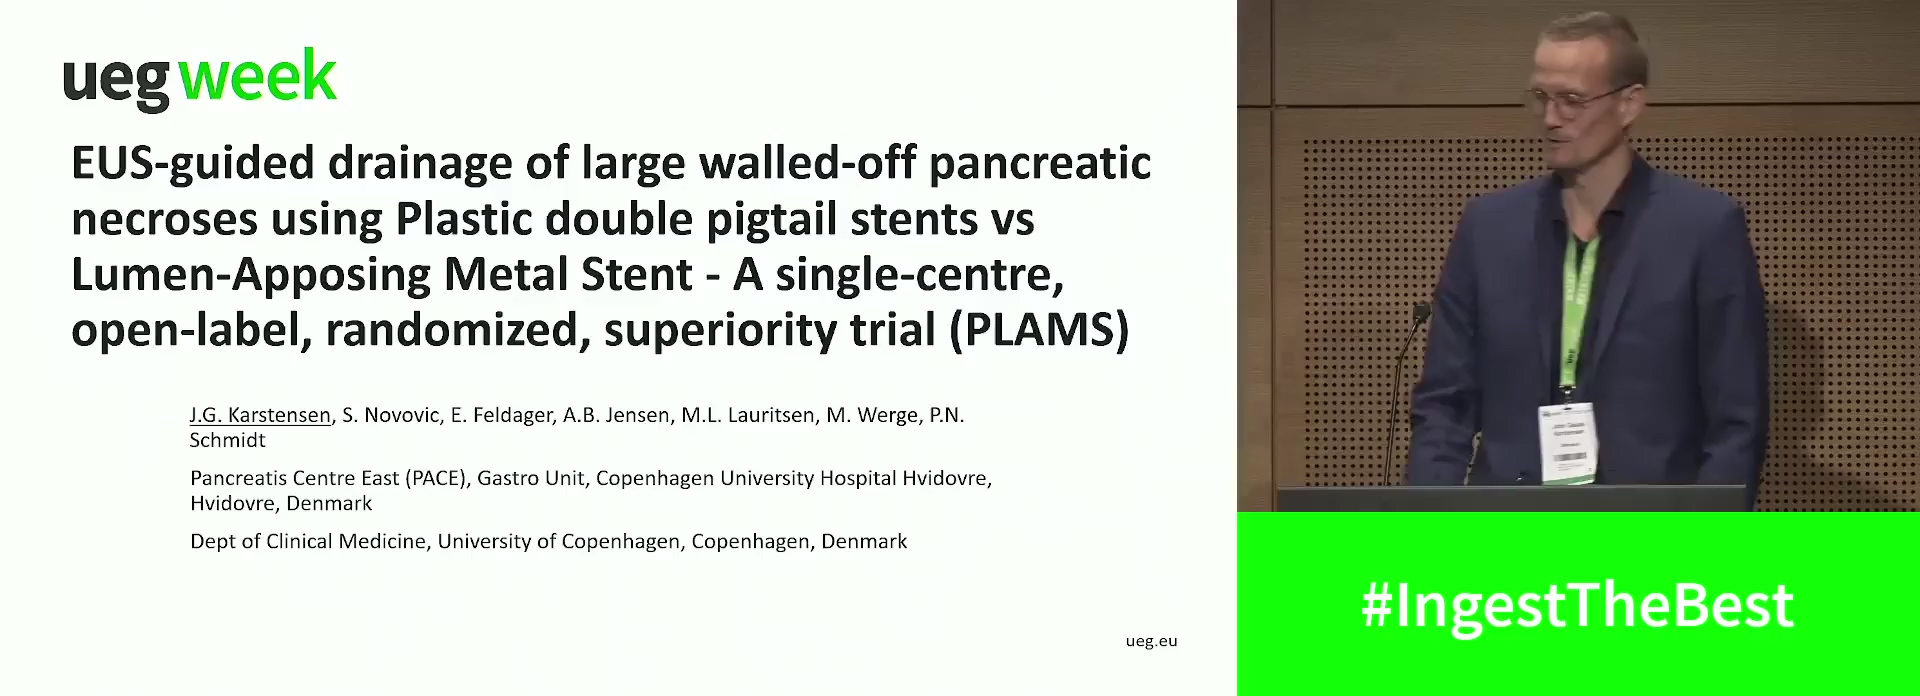 EUS-GUIDED DRAINAGE OF LARGE WALLED-OFF PANCREATIC NECROSES USING PLASTIC DOUBLE PIGTAIL STENTS VS LUMEN-APPOSING METAL STENT - A SINGLE-CENTRE, OPEN-LABEL, RANDOMIZED, SUPERIORITY TRIAL (PLAMS)